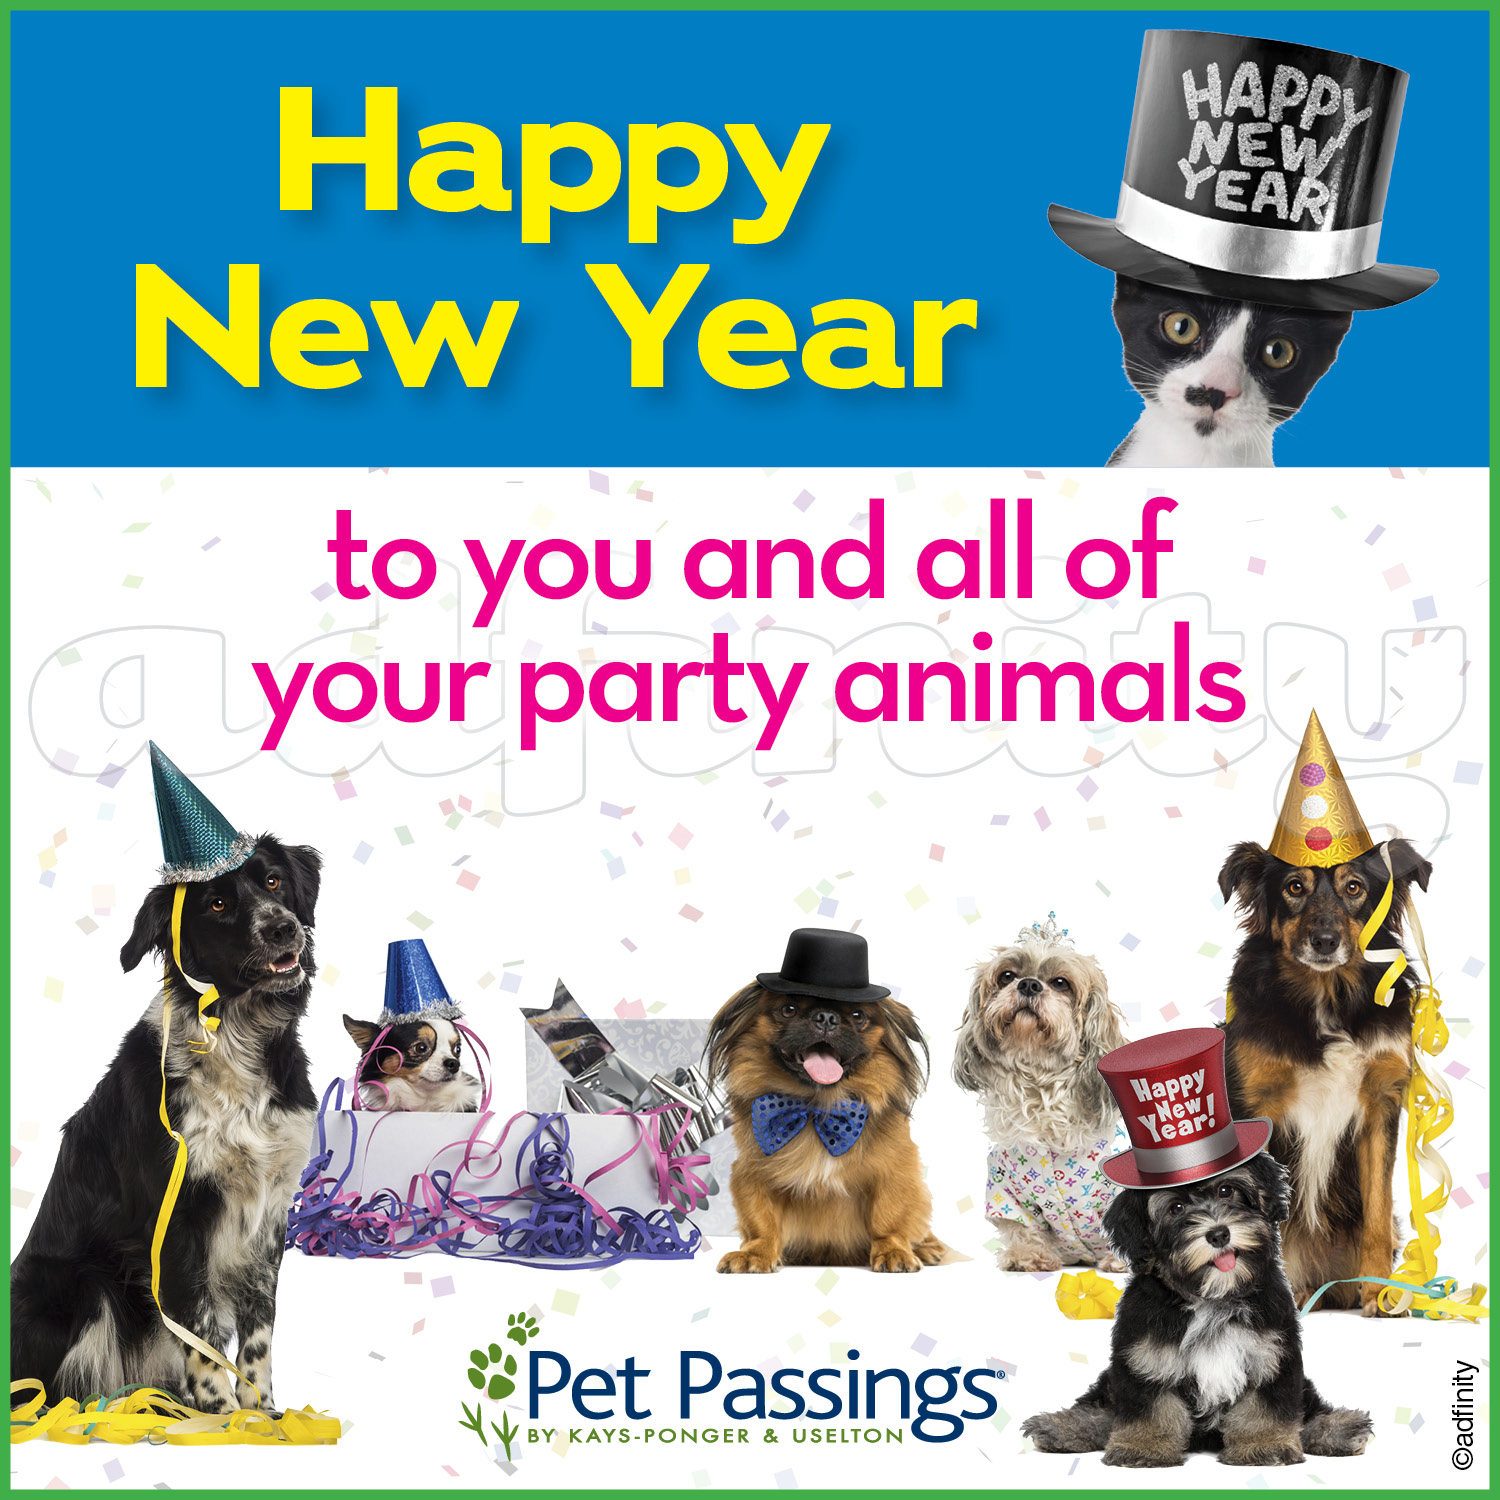 Happy New Year to you and all of your party animals ...